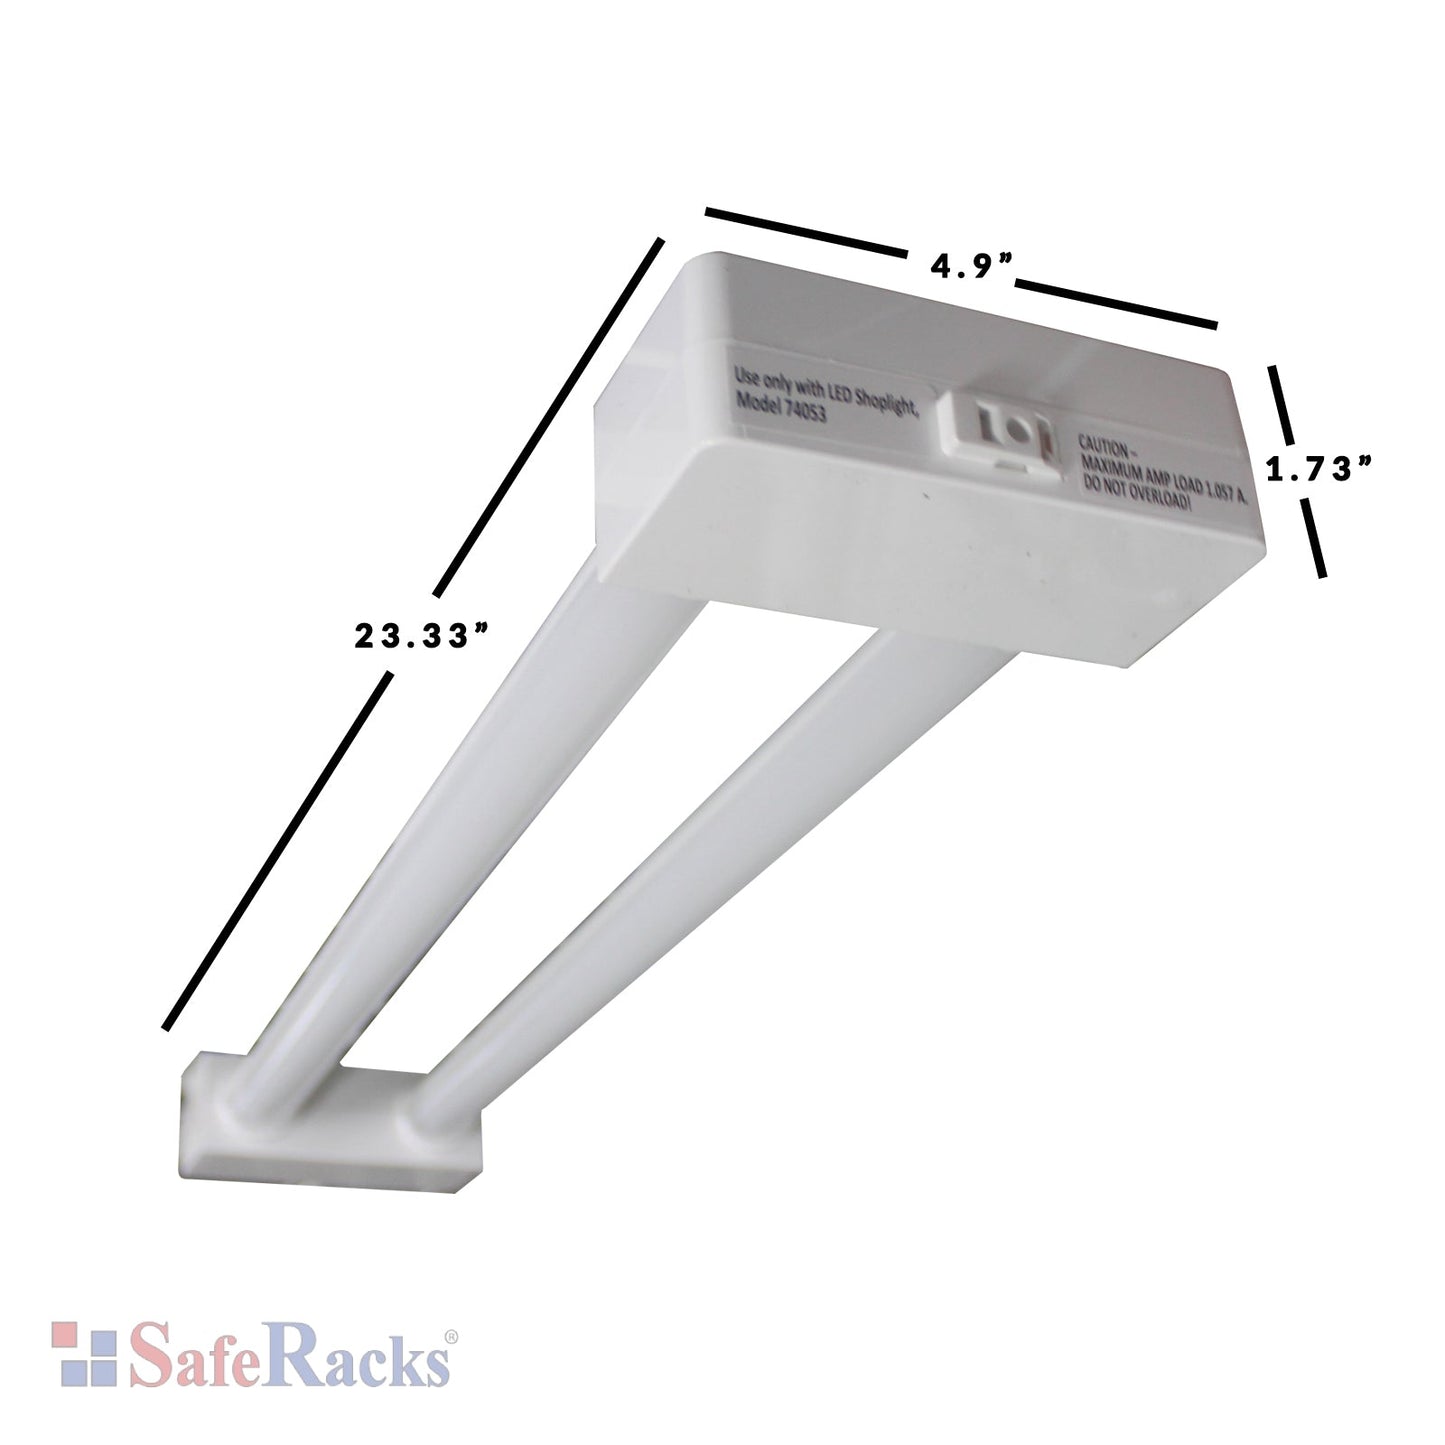 LED light with dimensions